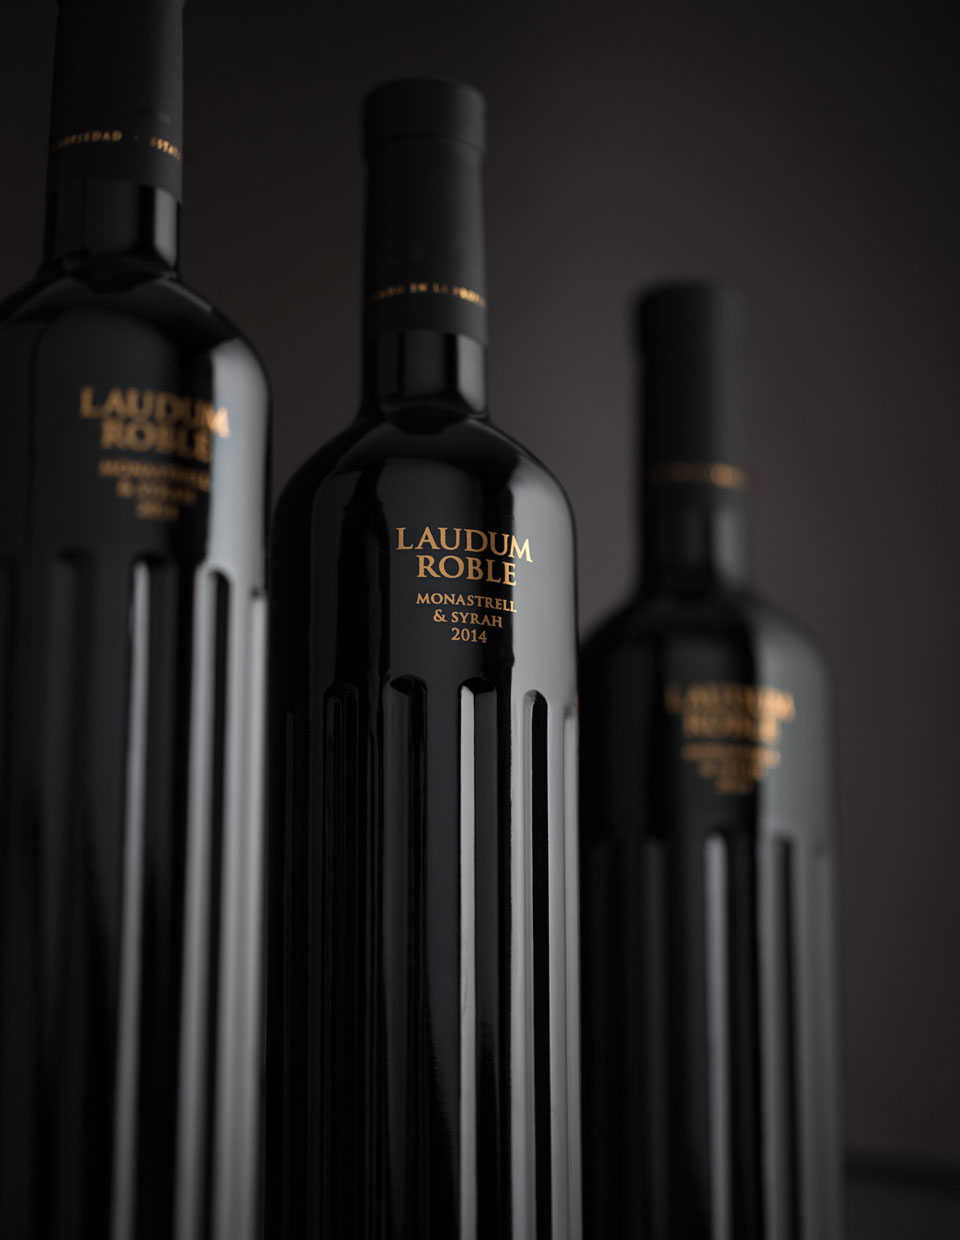 Buy Red Wine Laudum Roble, a new concept of Mediterranean wine